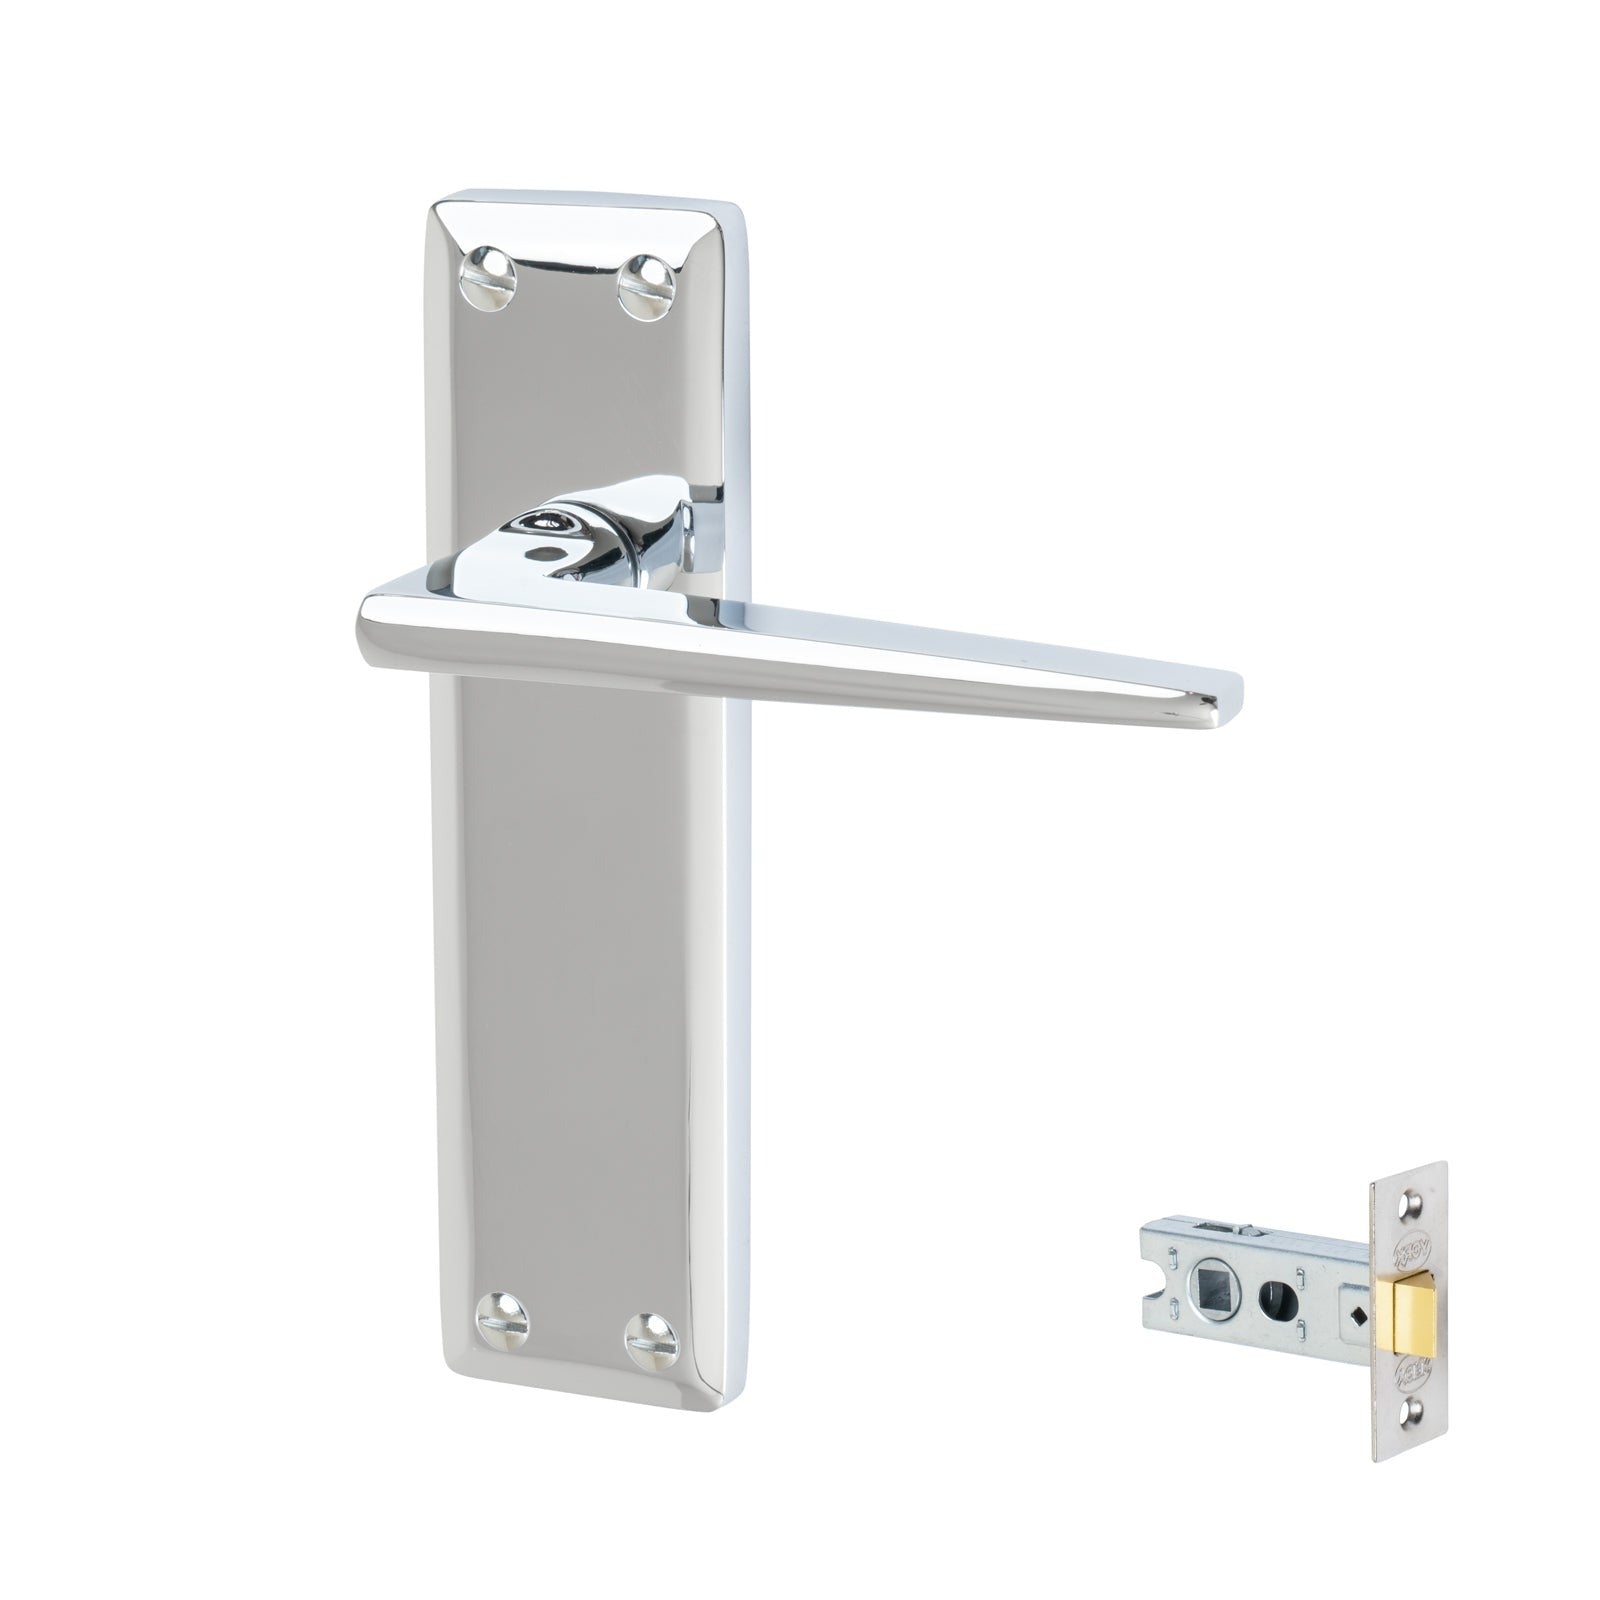 Kendal Door Handles On Plate Latch Handle Set in Polished Chrome